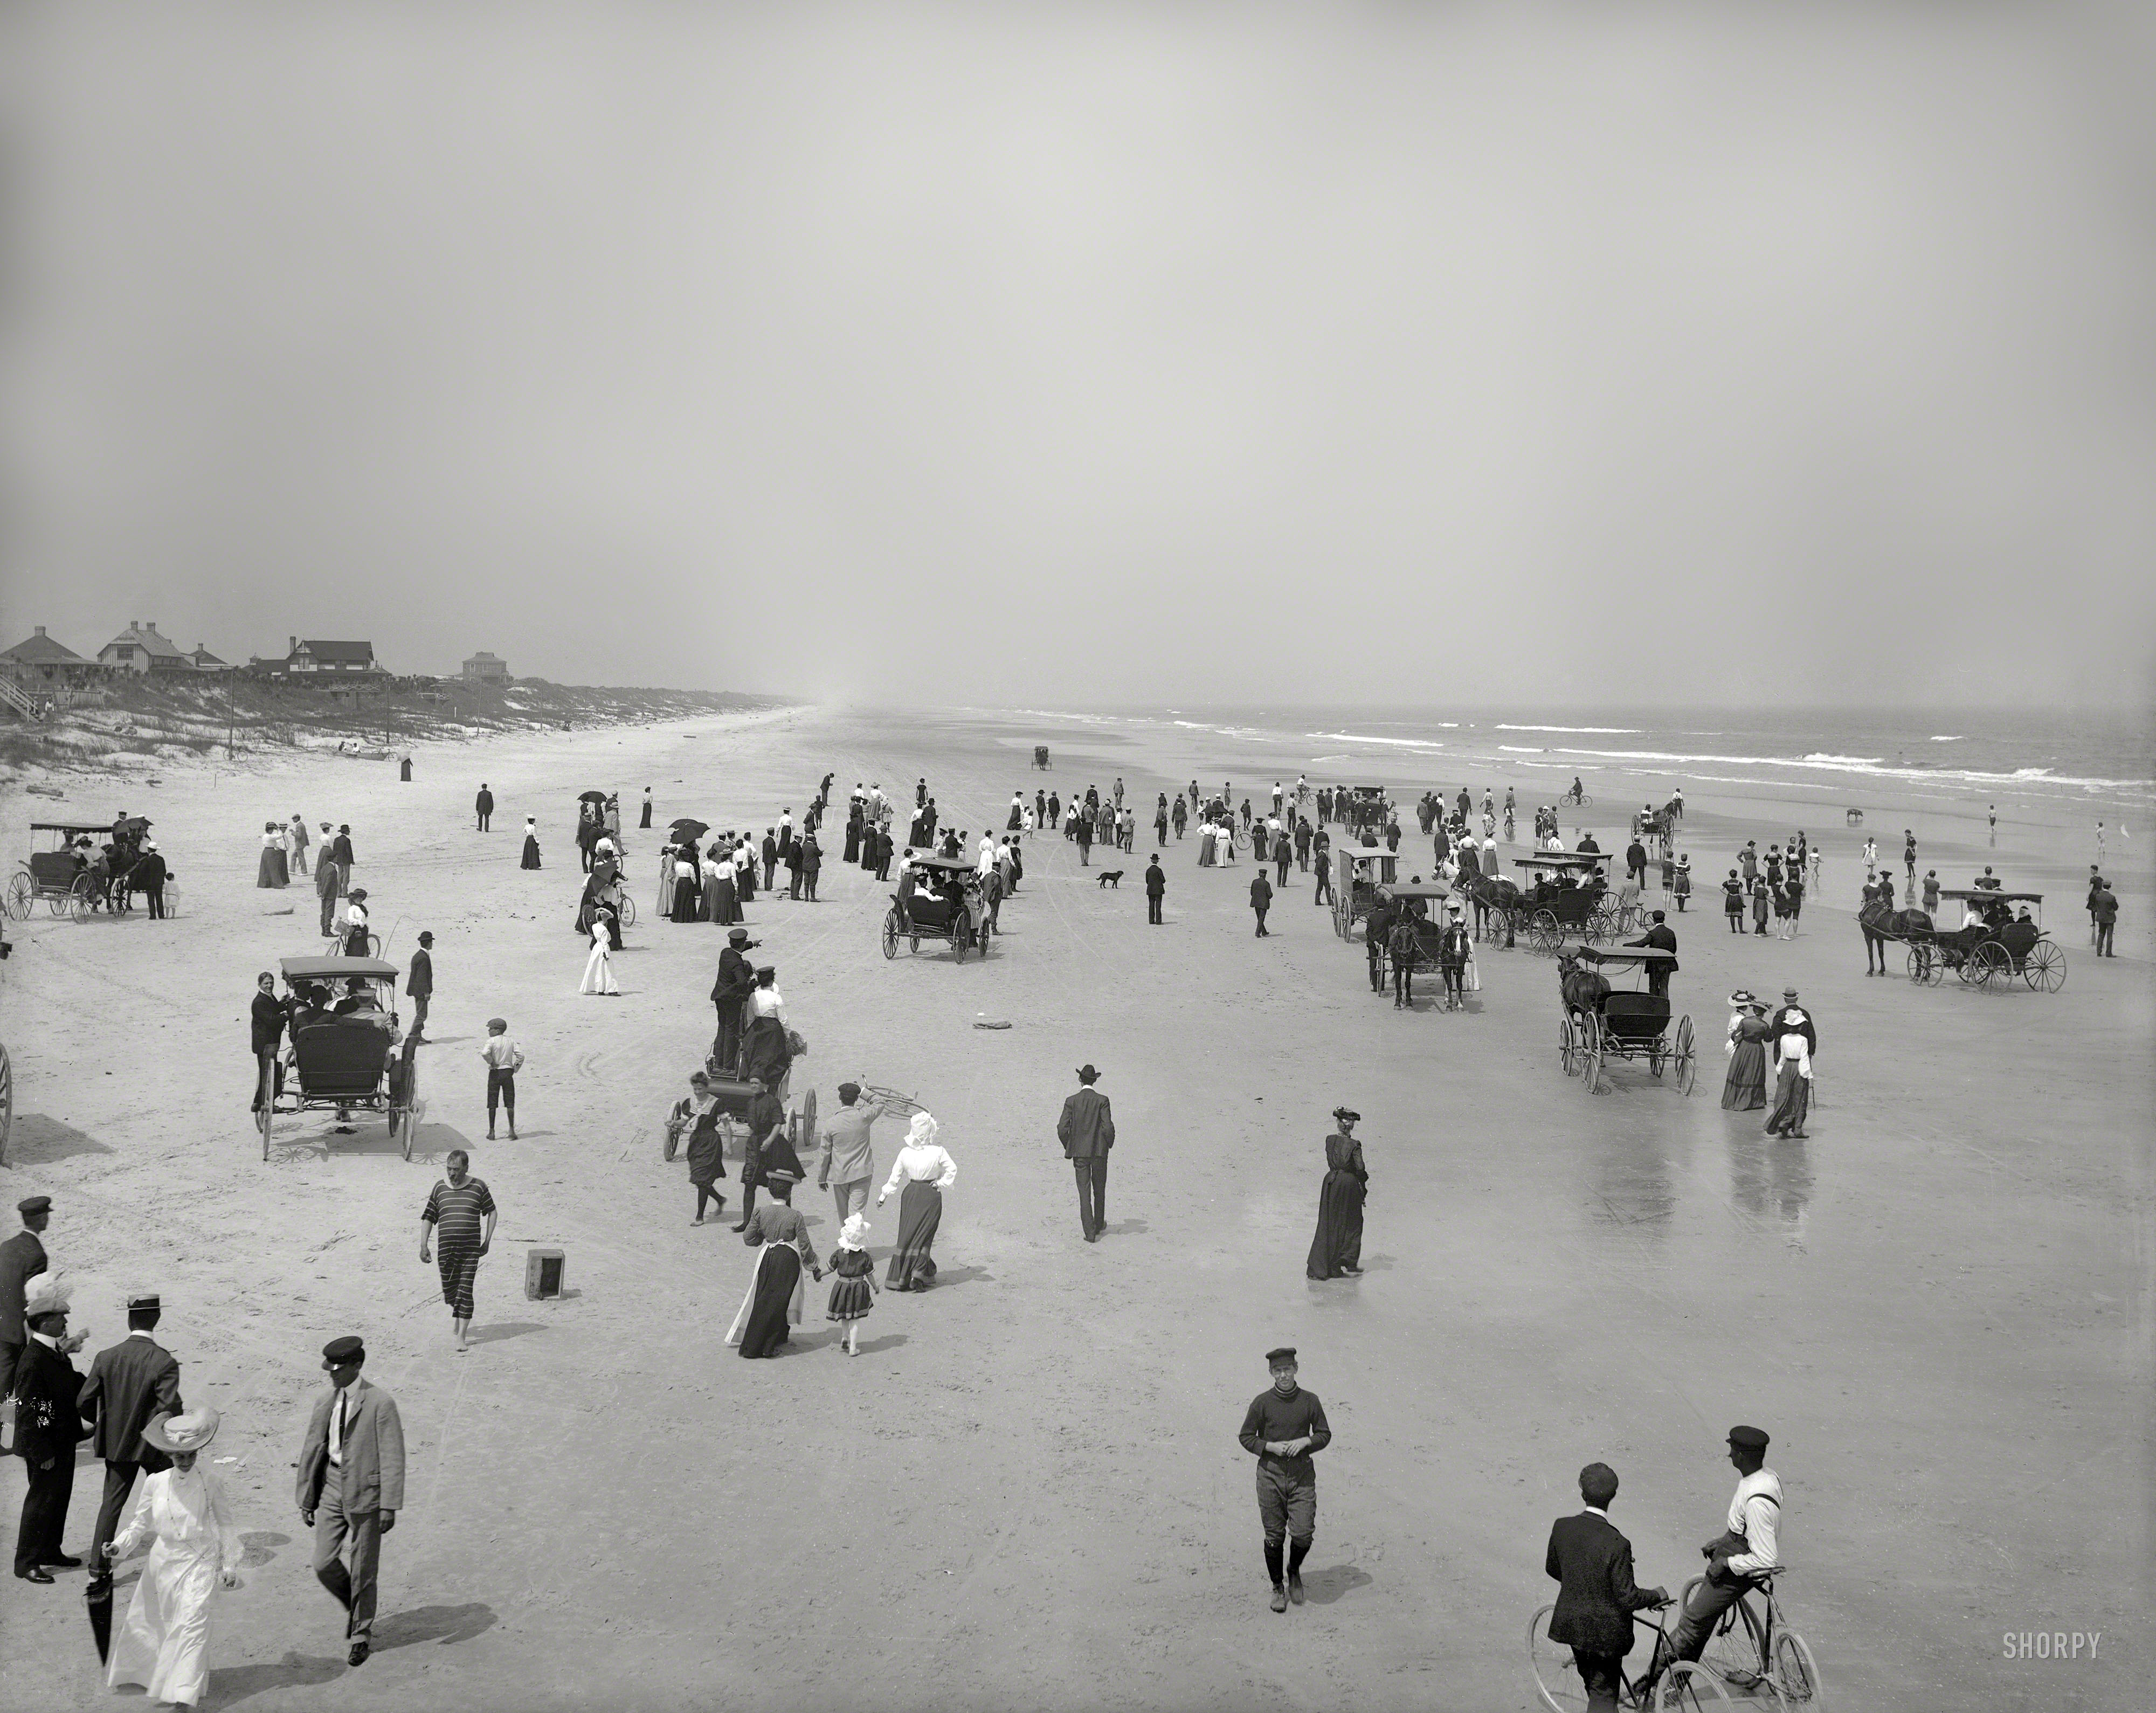 &nbsp; &nbsp; &nbsp; &nbsp; UPDATE: This is perhaps the earliest known example of a pig photobomb. See the comments for details.
Circa 1904. "The beach at Seabreeze -- Daytona, Florida." Open-air showcase for the latest styles in bonnets, bathing-costumes, self-propelled runabouts and light rigs. 8x10 inch glass negative, Detroit Publishing Co. View full size.